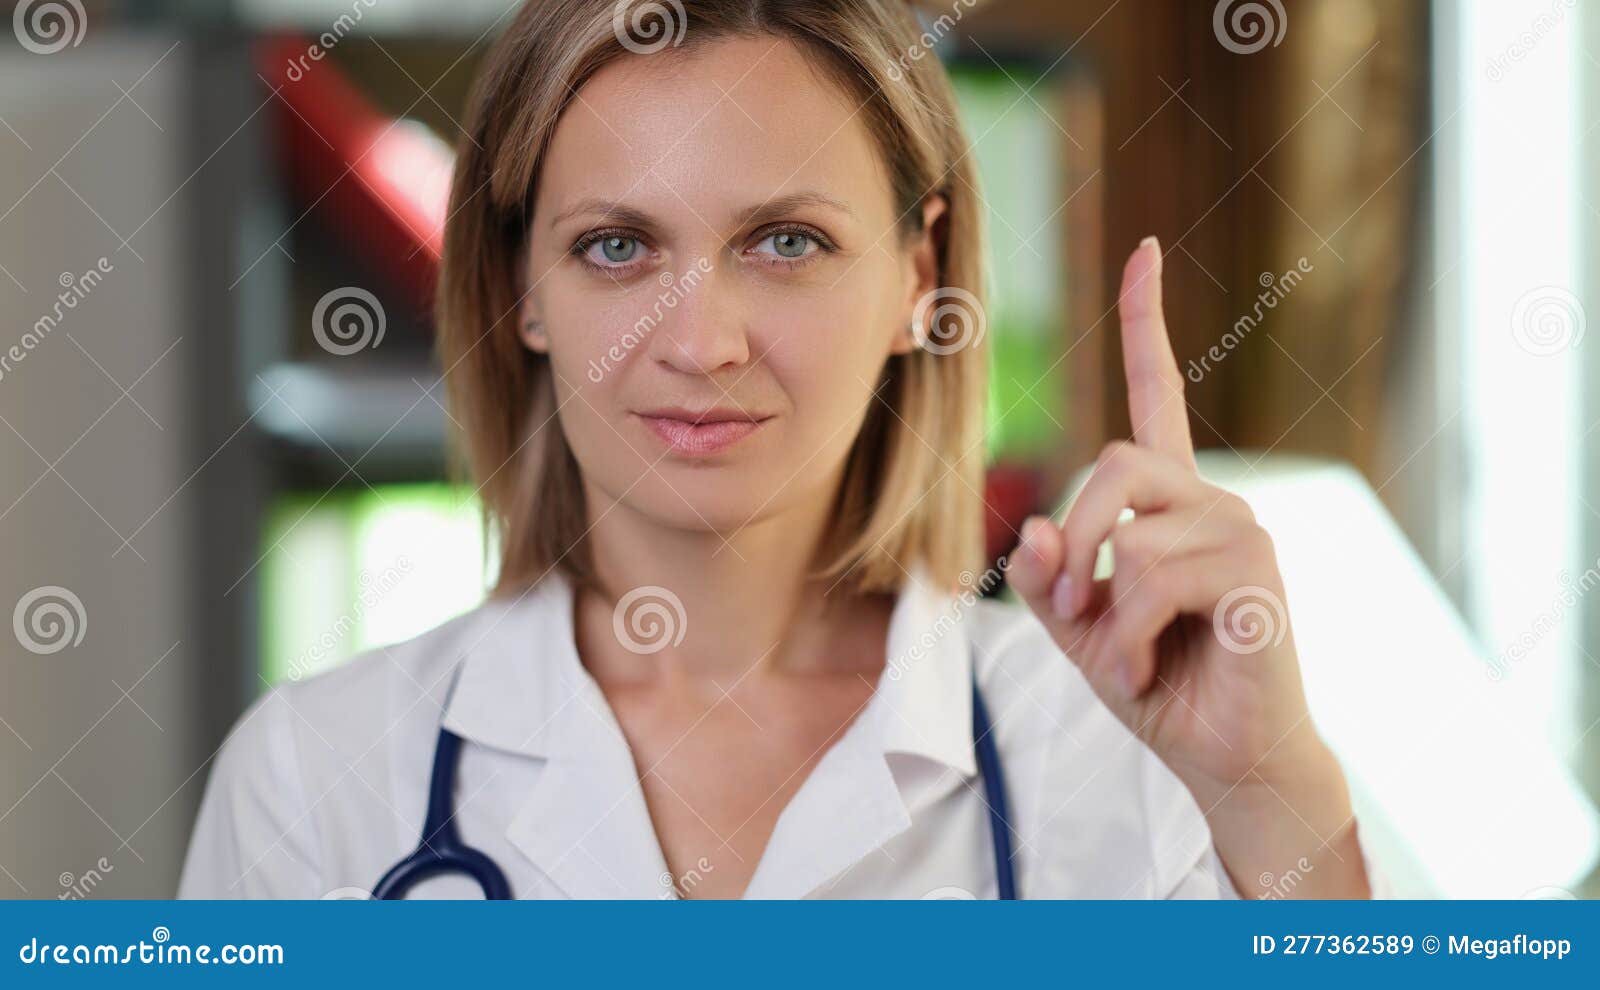 woman doctor pointing finger up in medical office